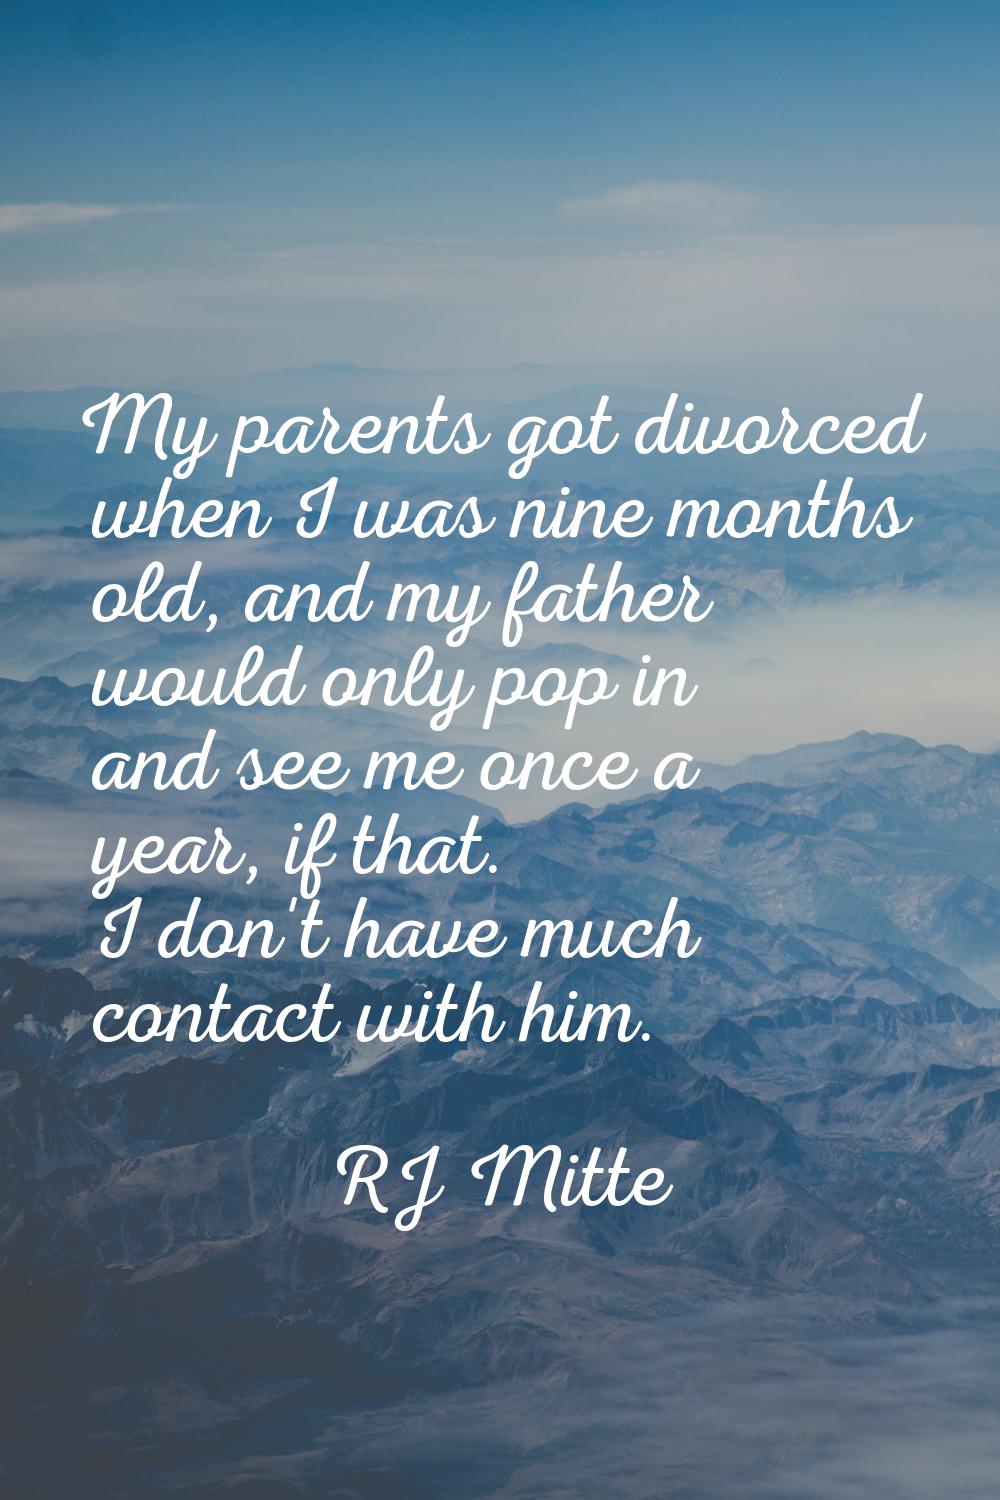 My parents got divorced when I was nine months old, and my father would only pop in and see me once